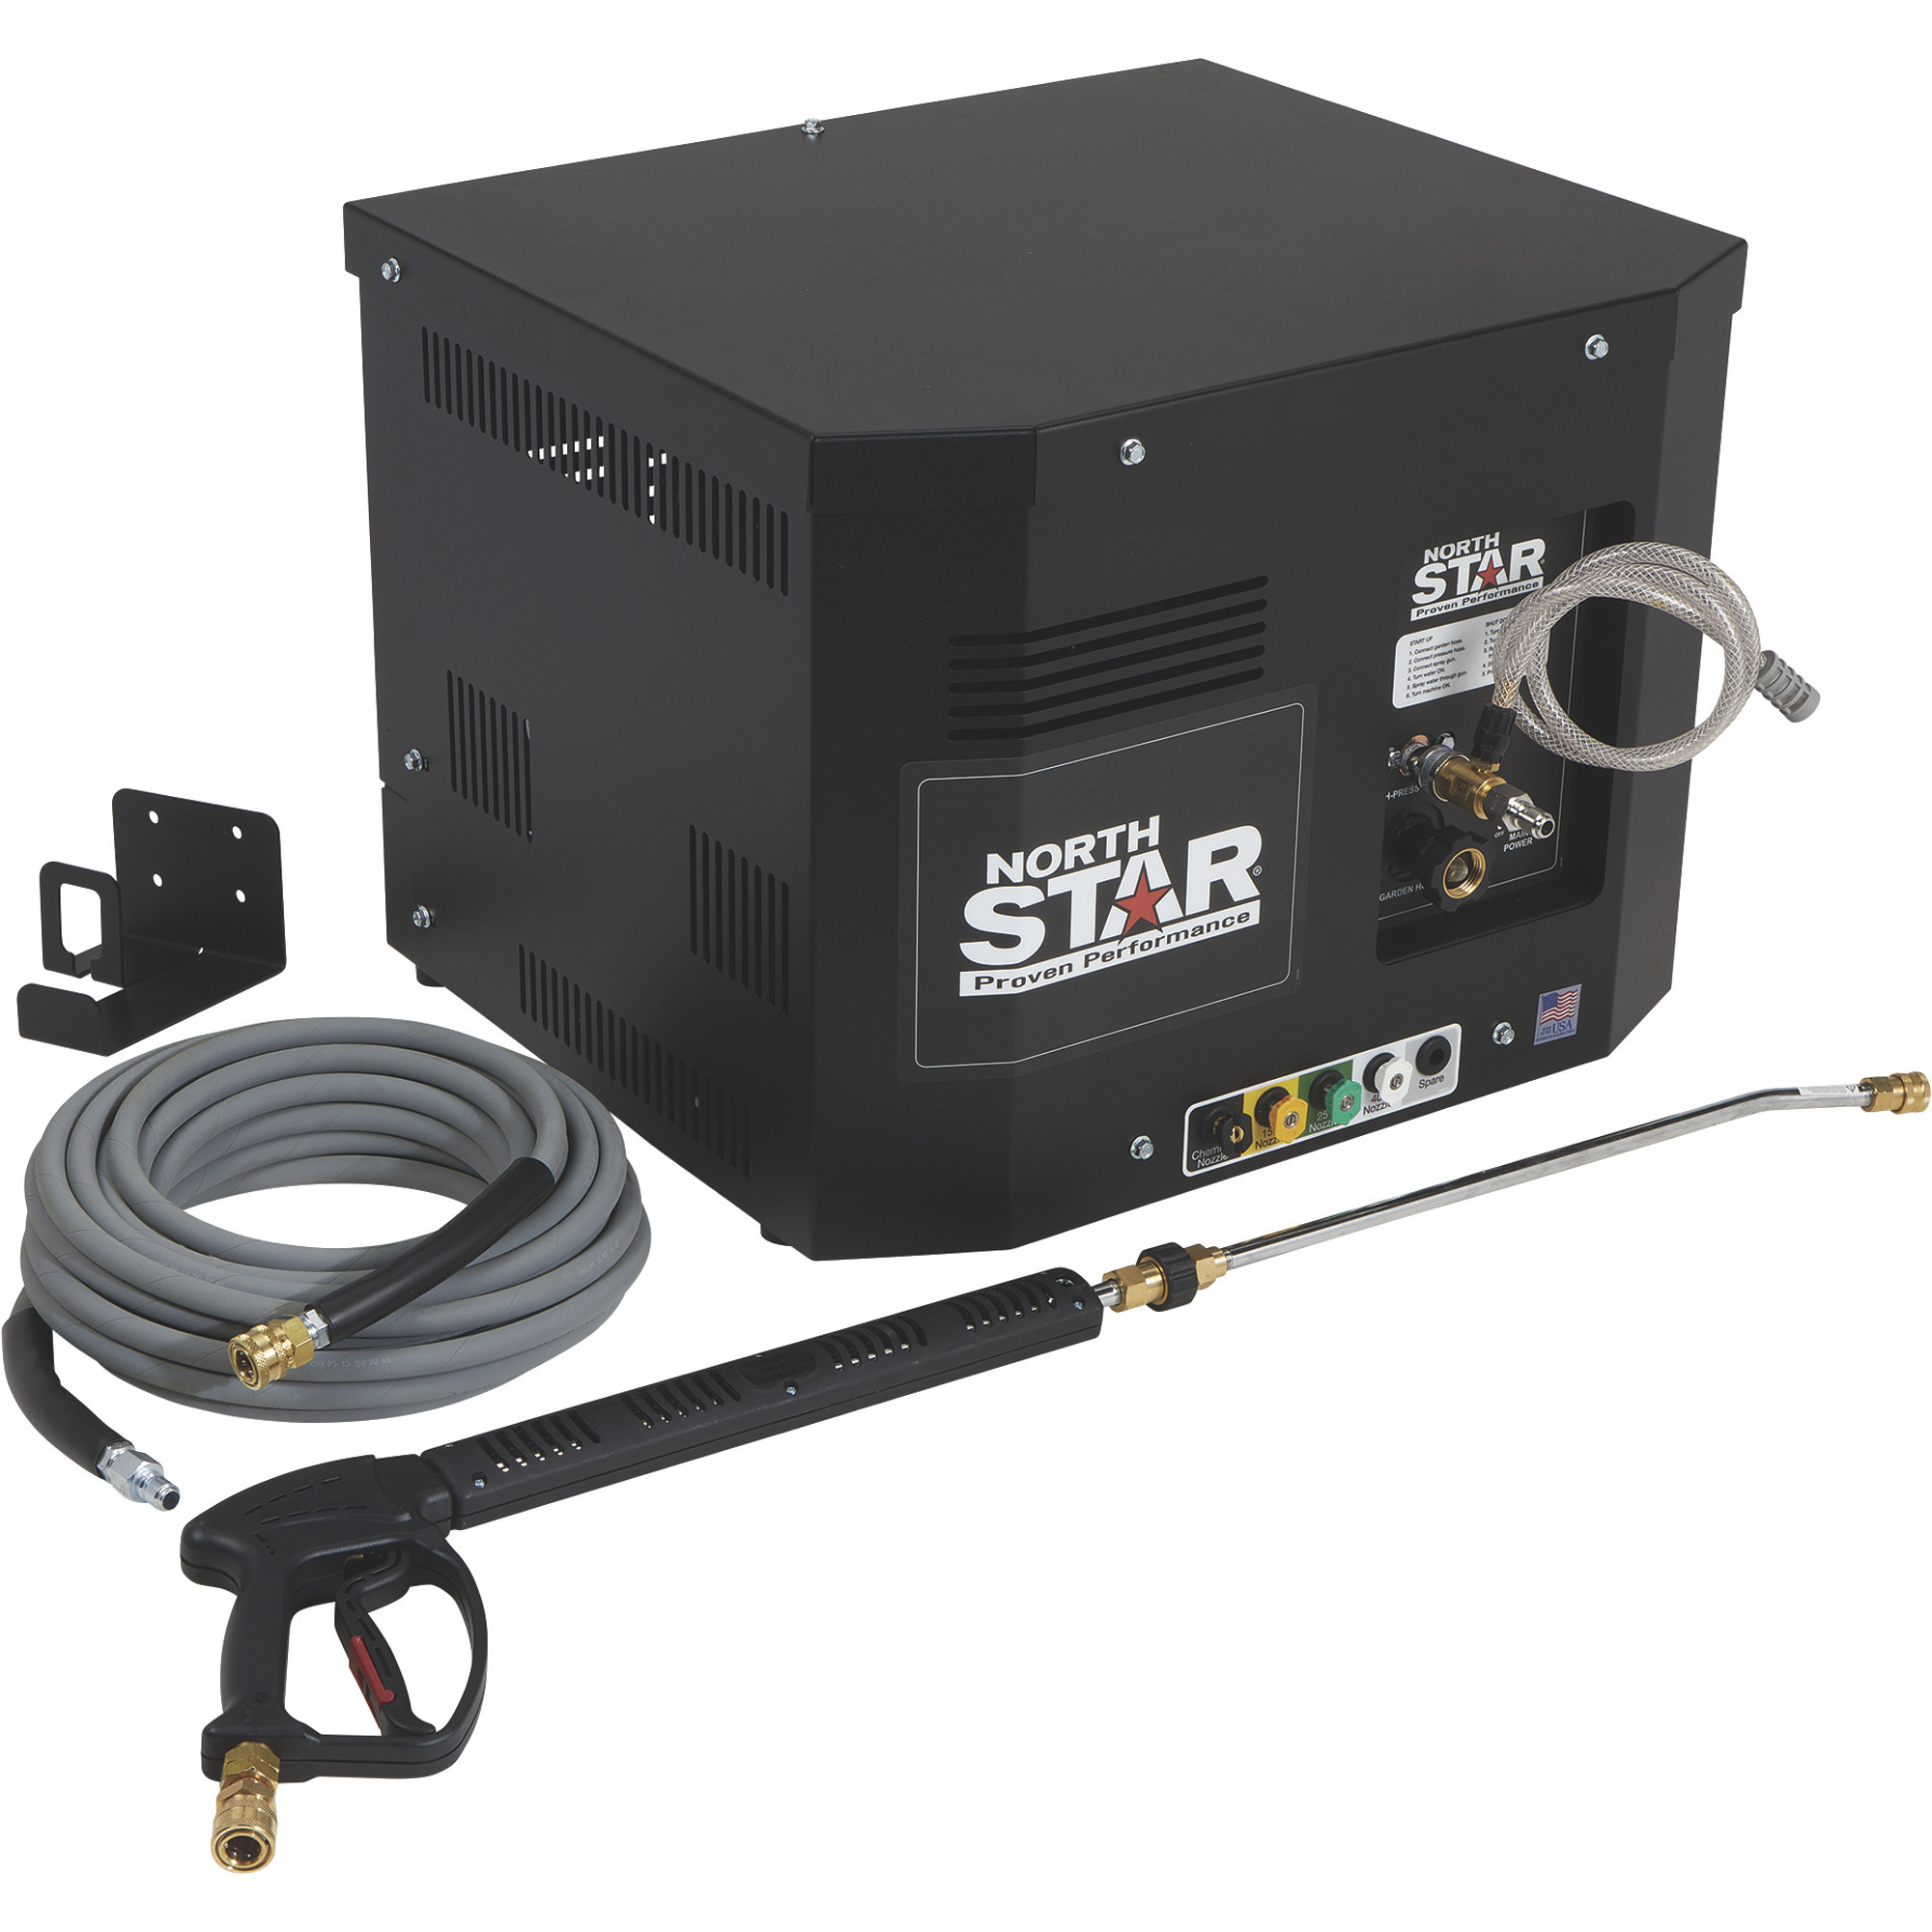 NorthStar 1500 PSI, 2.0 GPM Electric Cold Water Total Start/Stop Stationary Pressure Washer â 120 Volts